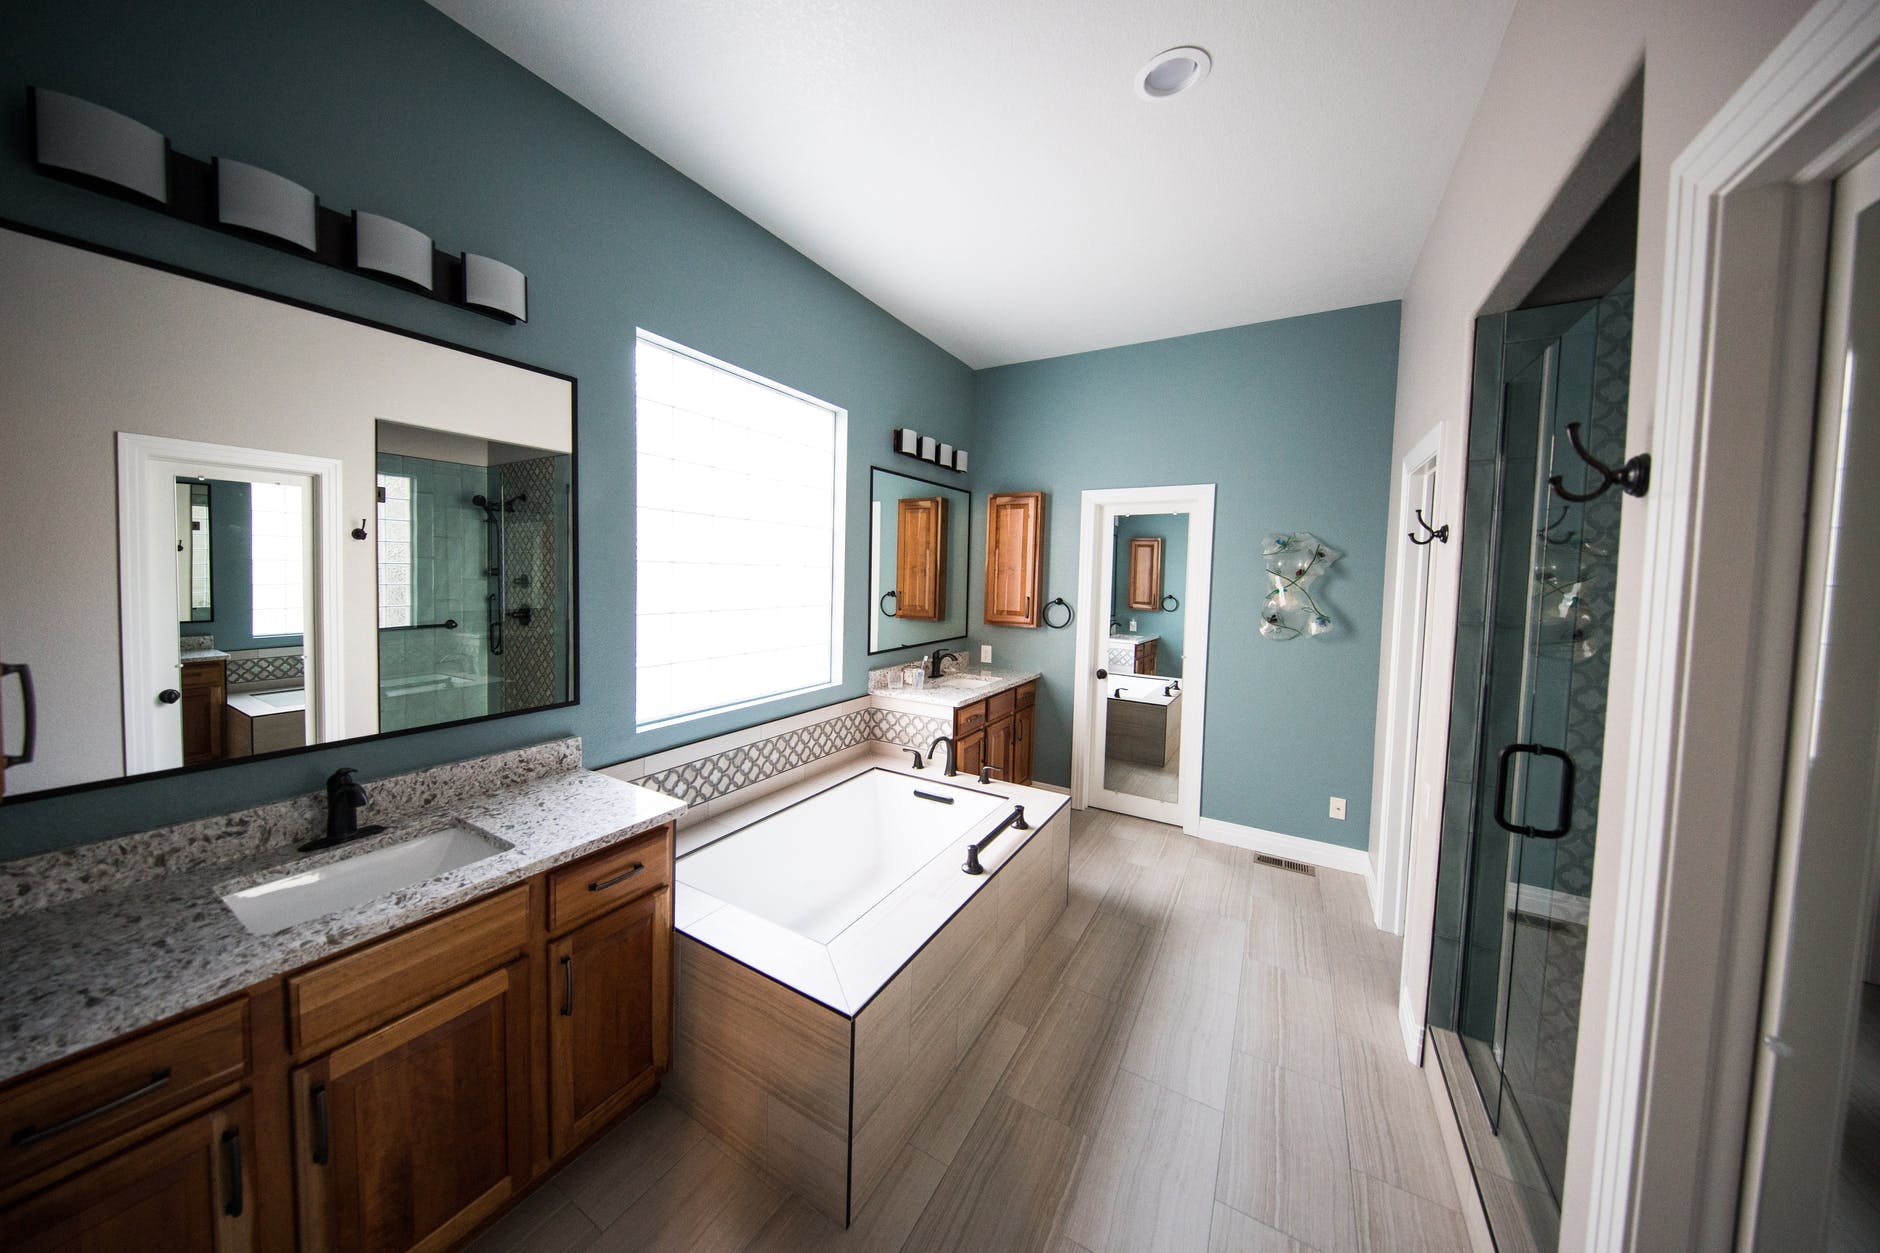 We provide the skill and craftmanship you need to create the bathroom you've been dreaming about.